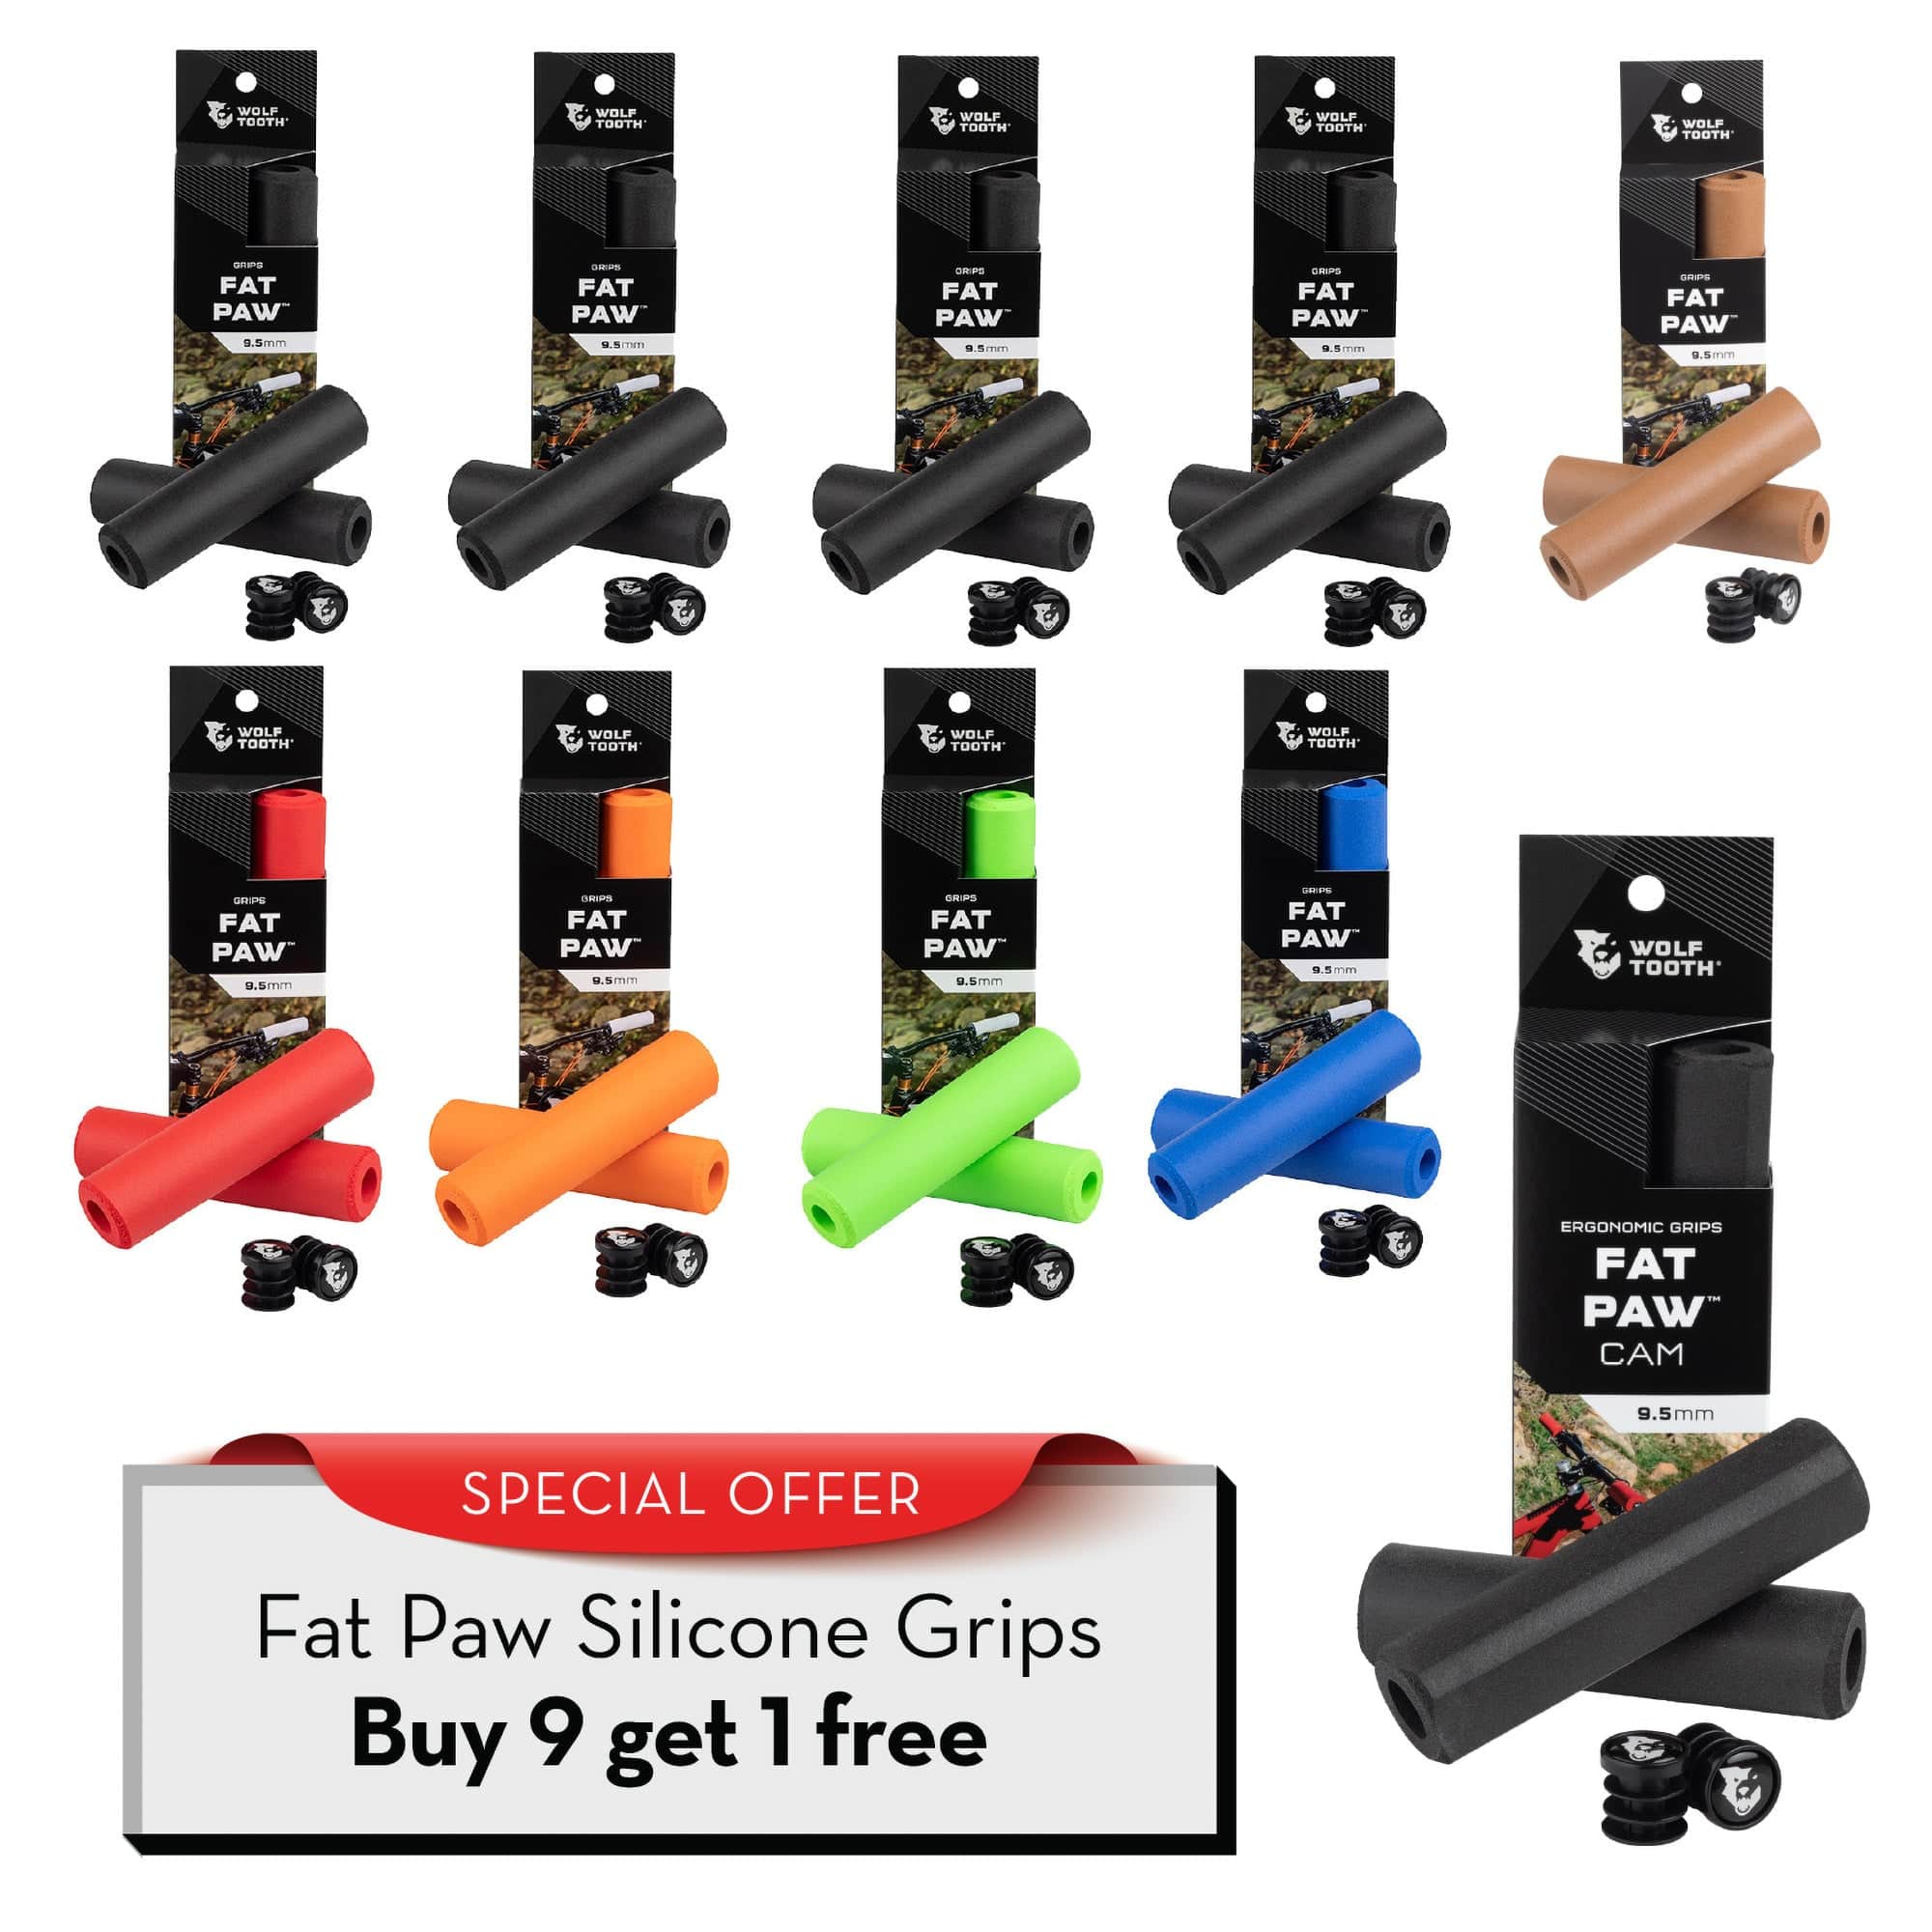 Fat Paw Grip Top Seller Bundle - Buy 9 sets and get 1 set for Free